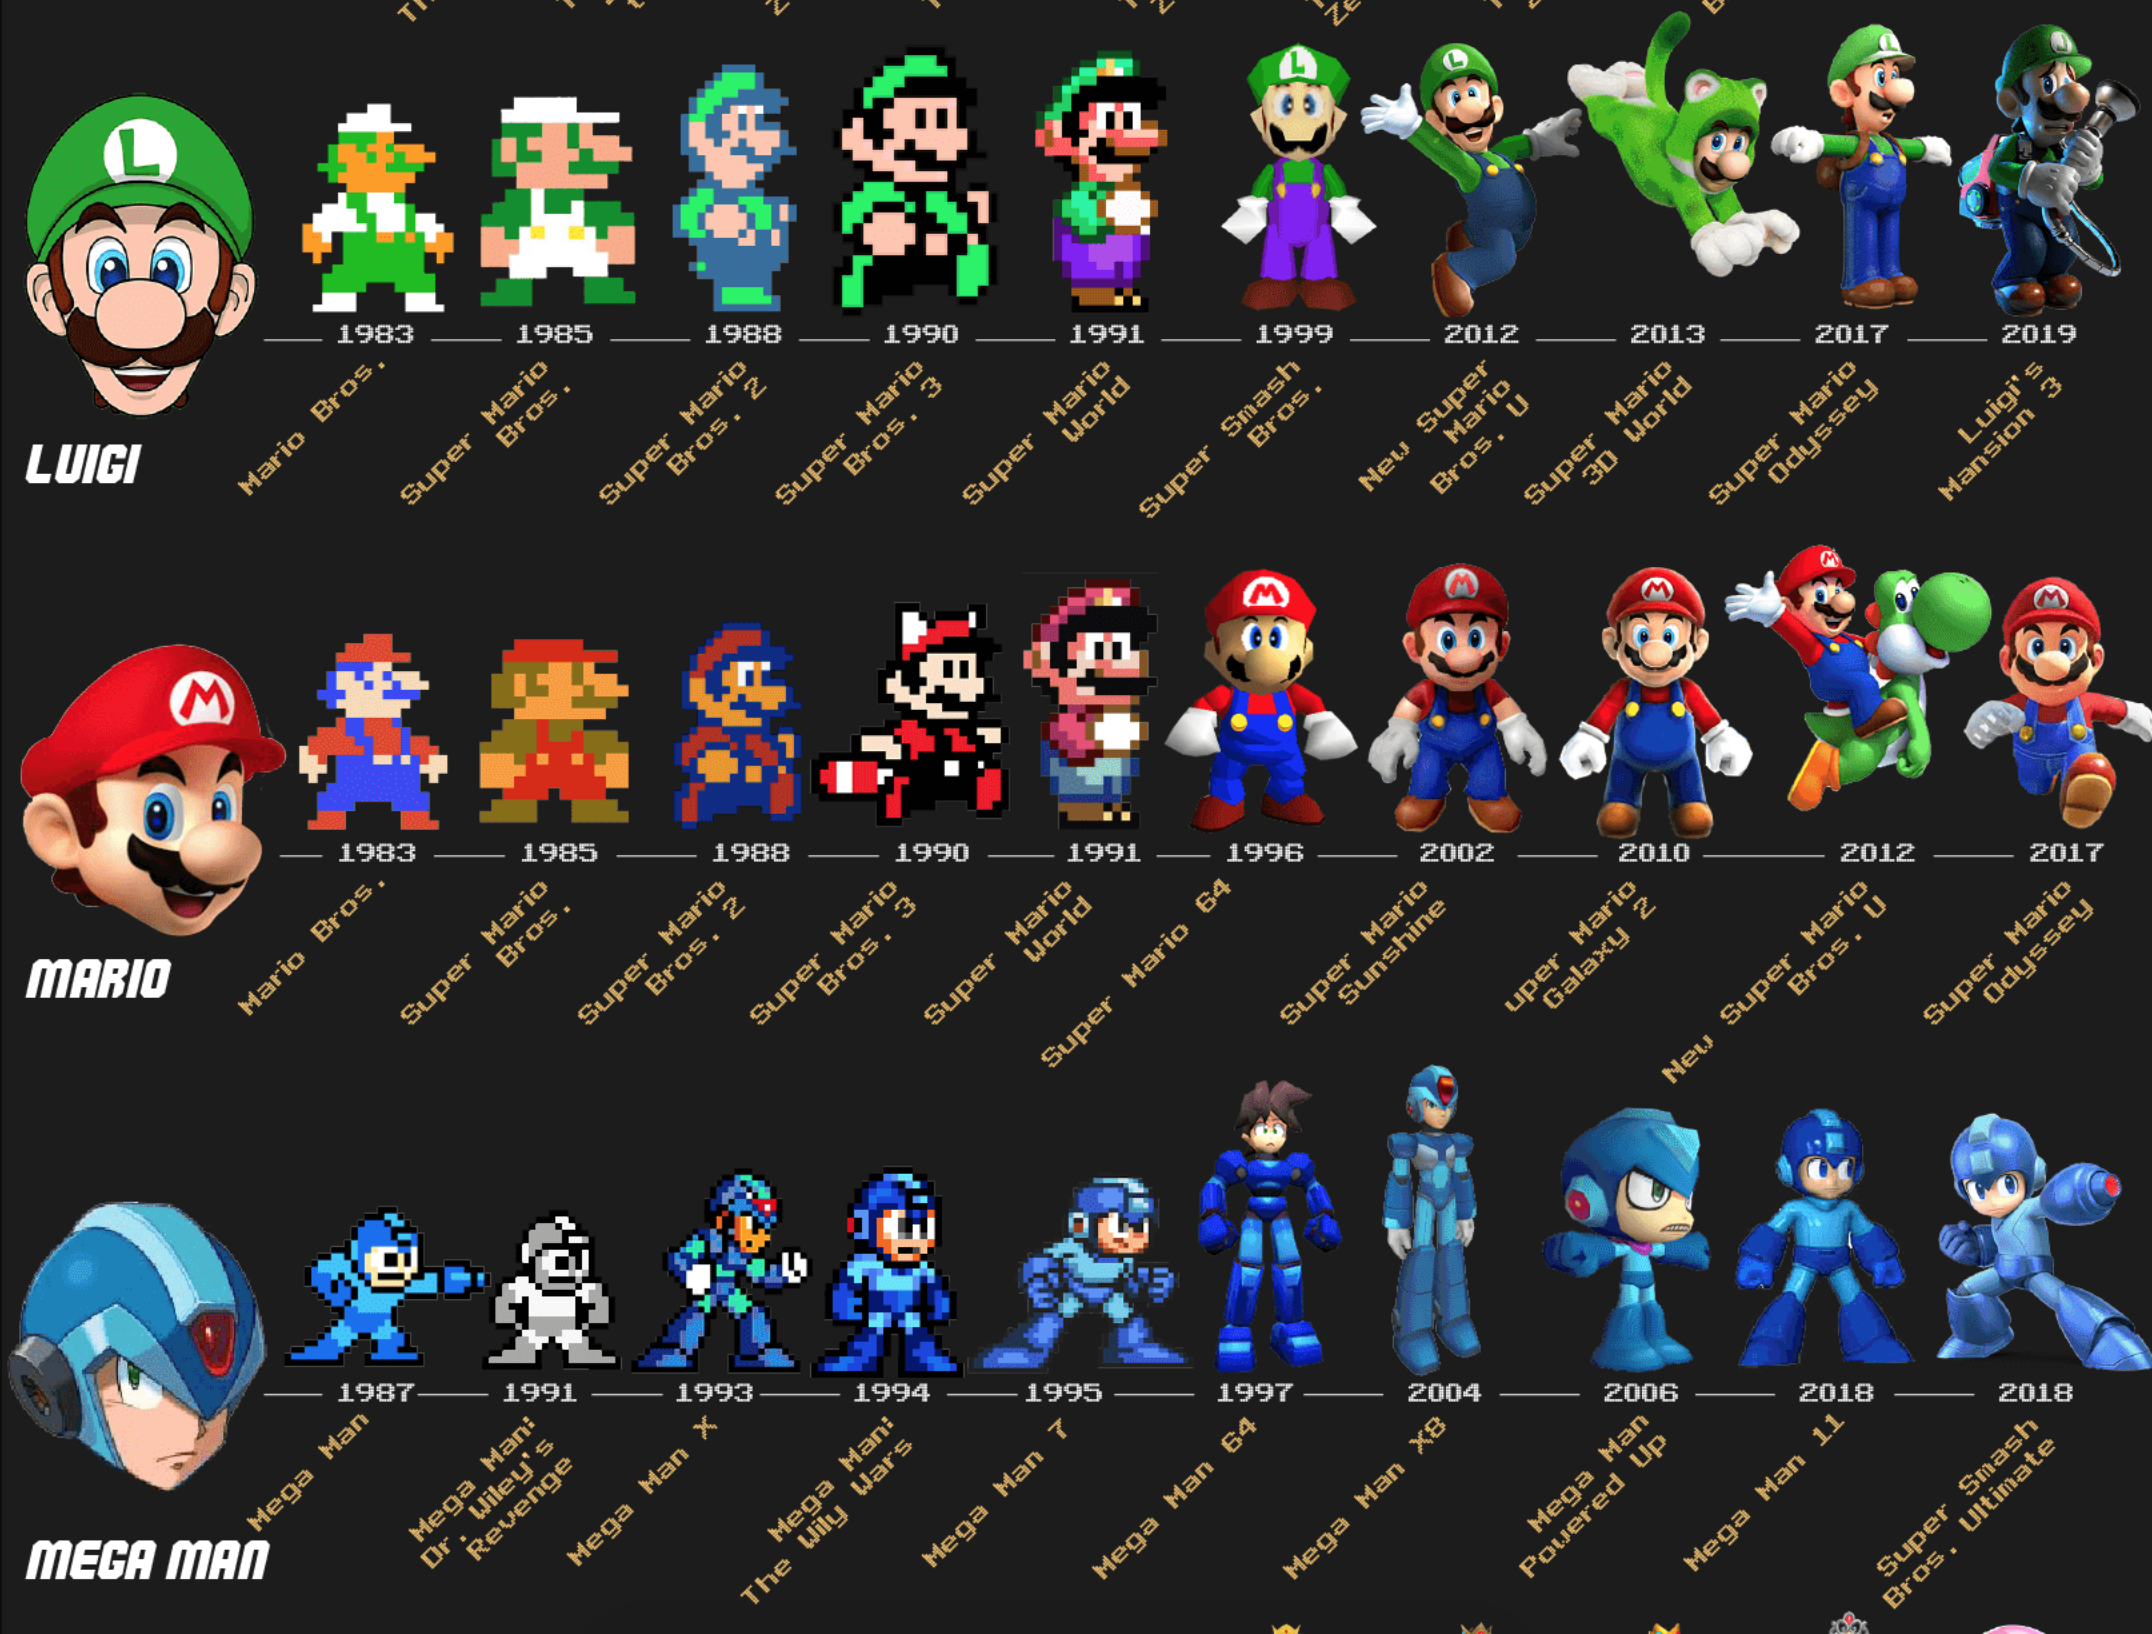 the in-game evolution of video game characters over time - through the years luigi mario mega man